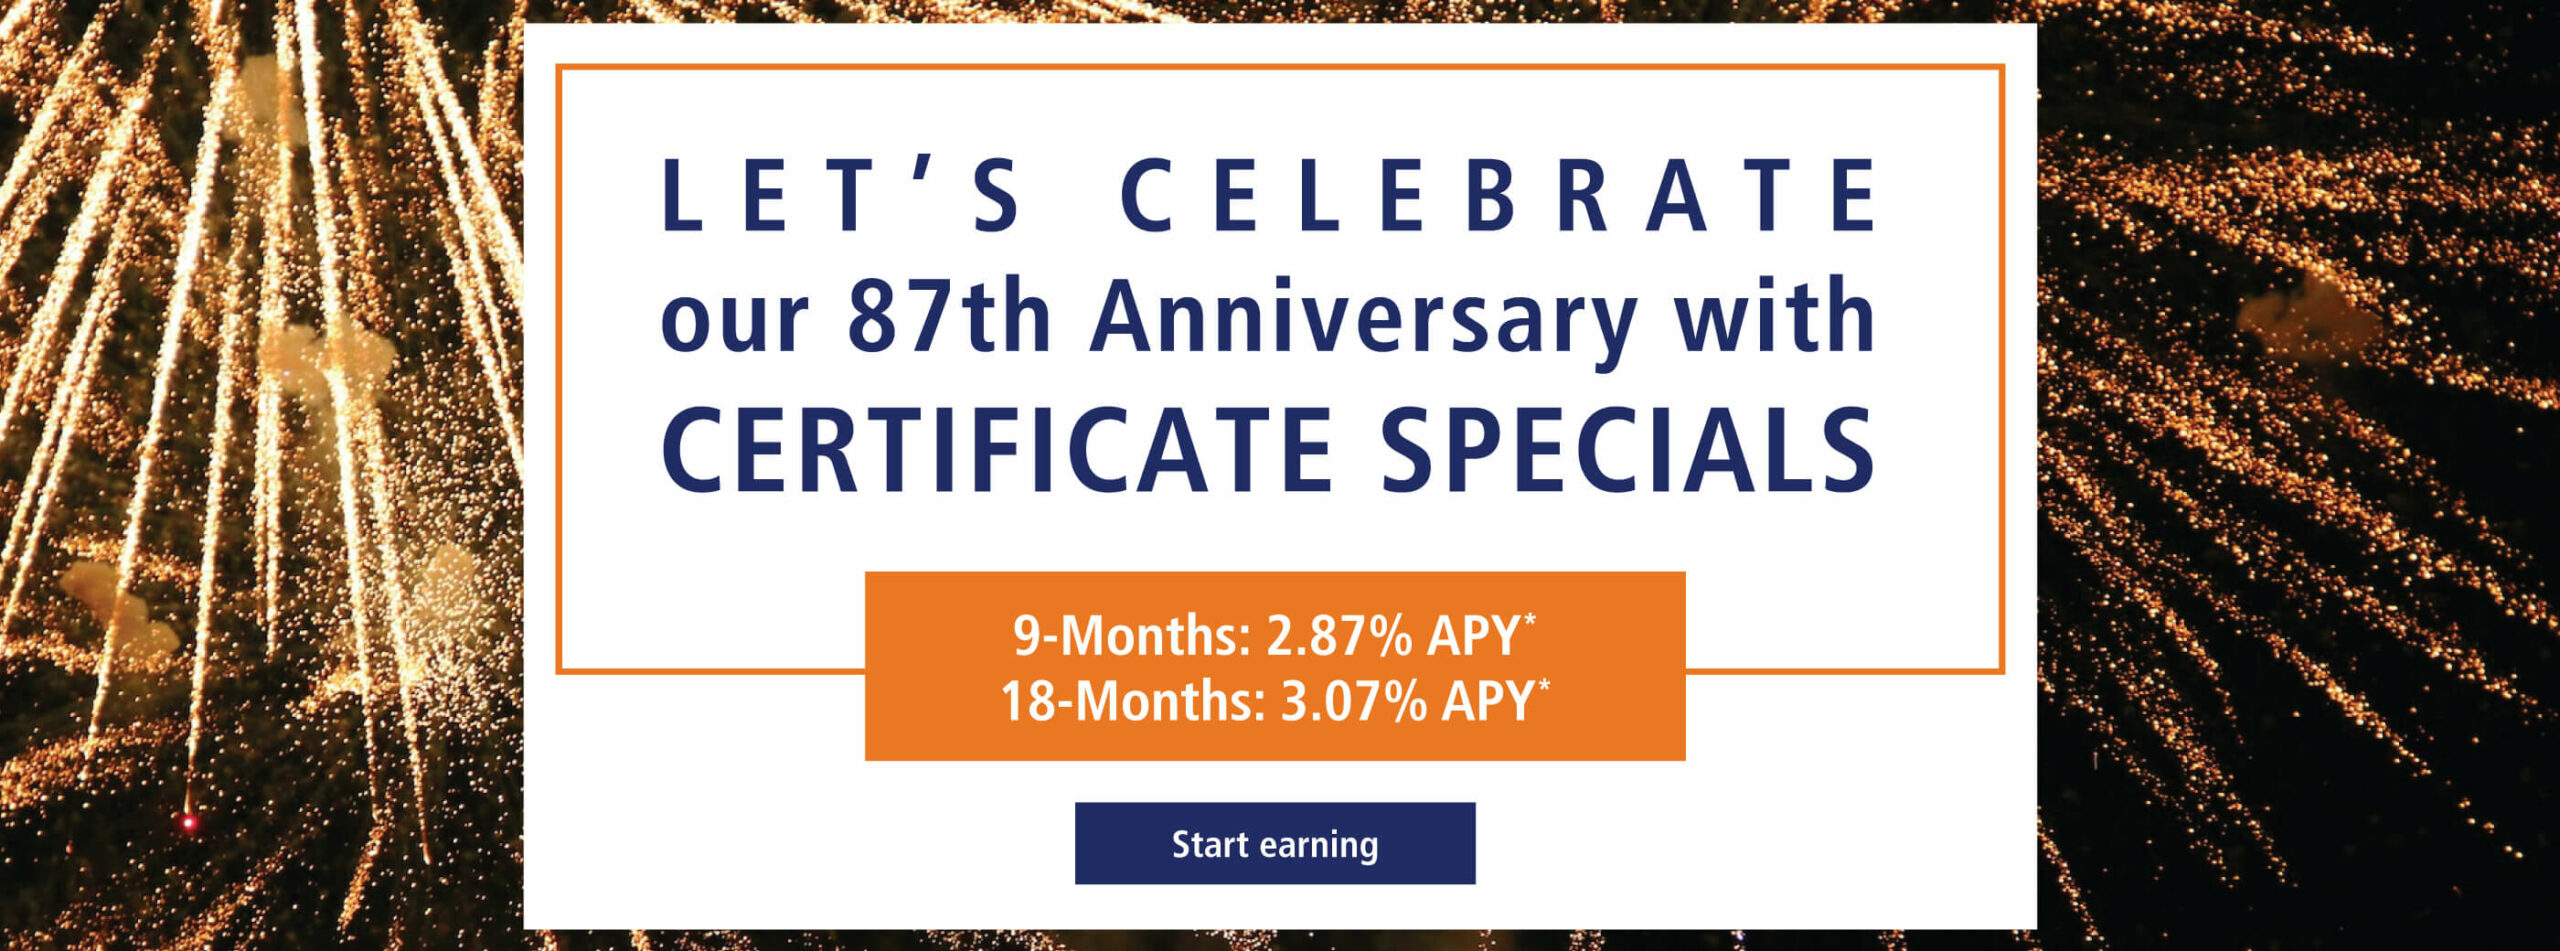 Celebrate our 87th Anniversary with Certificate Specials